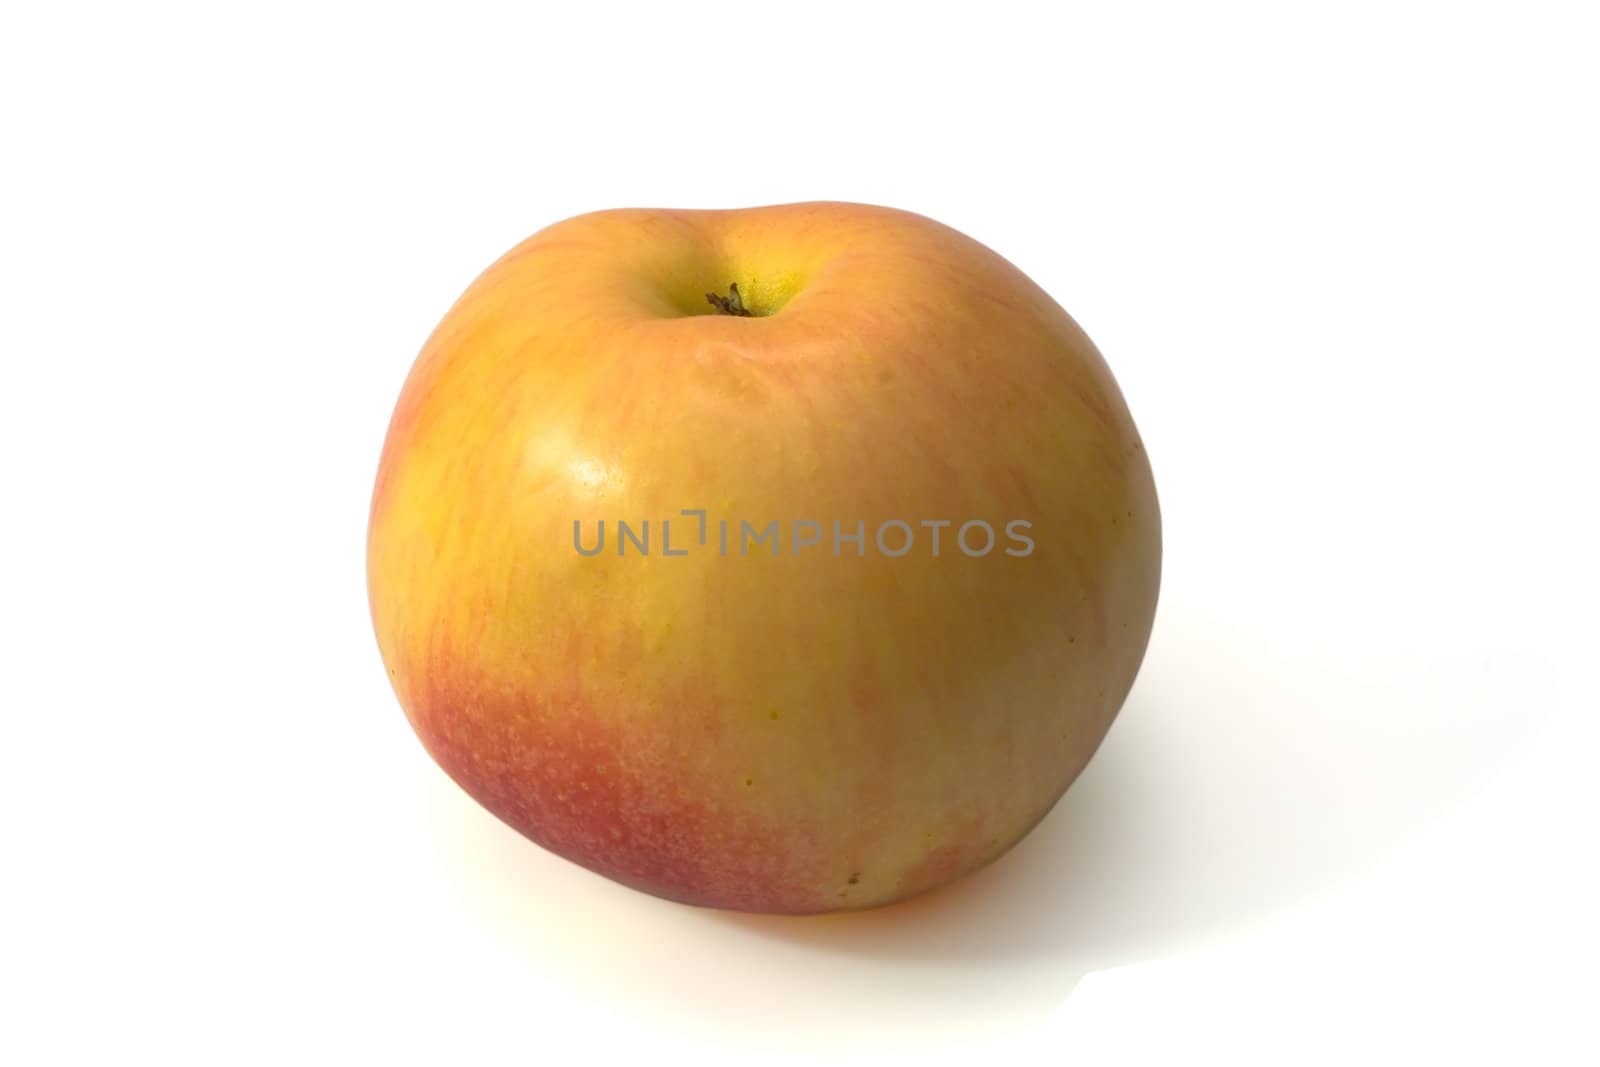 Ripe and tasty apple on a white background